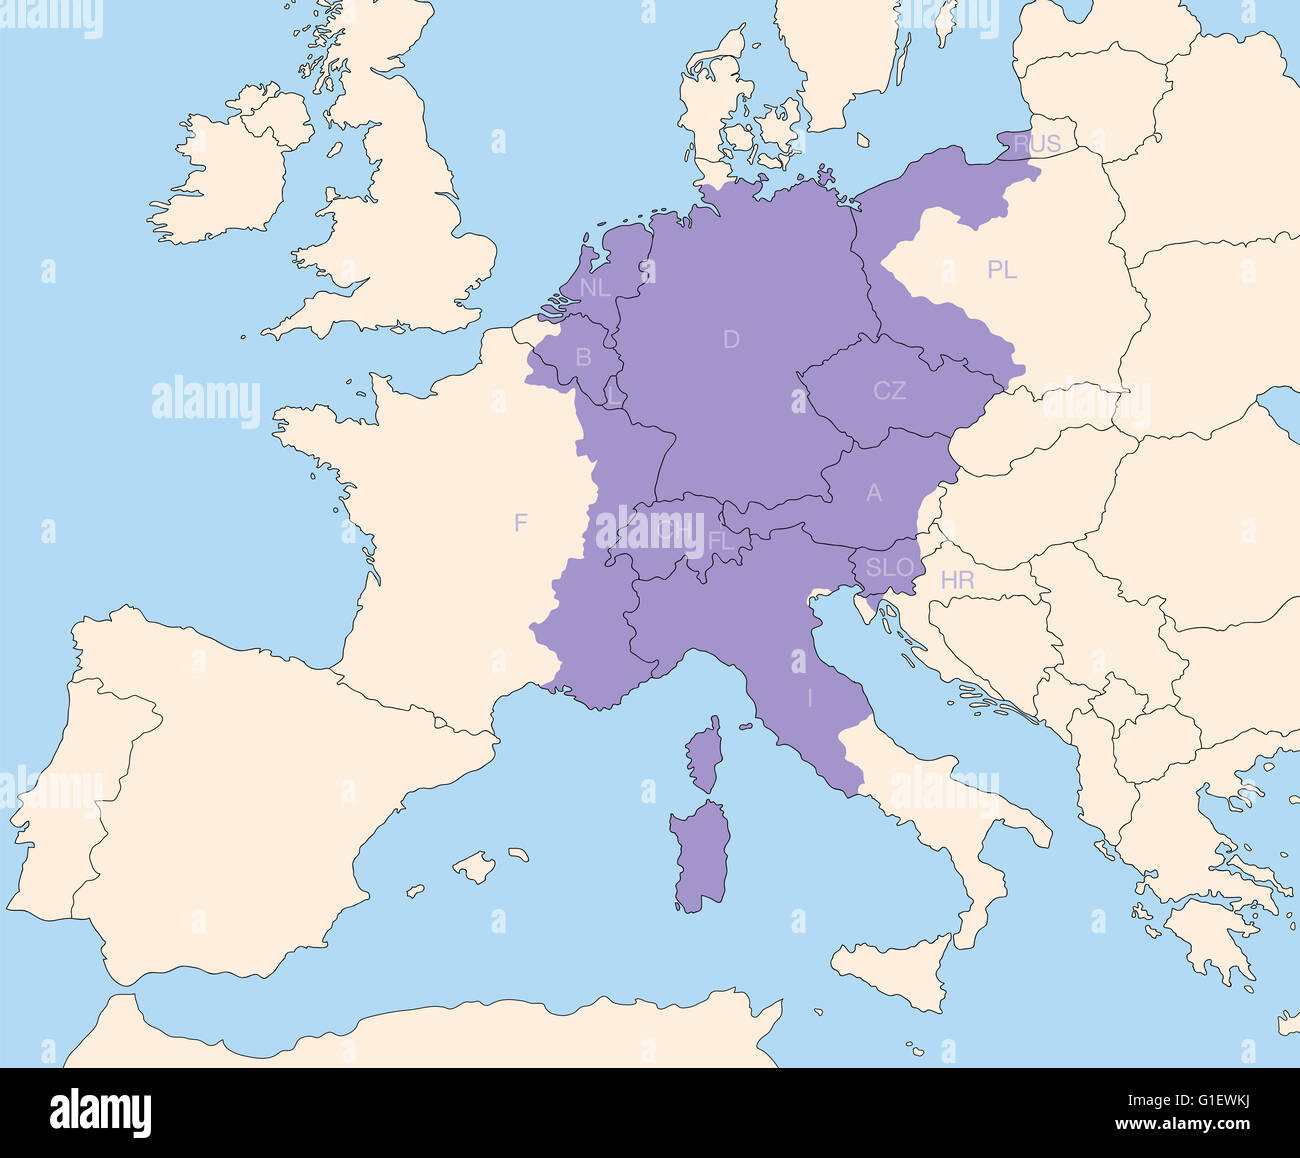 Holy Roman Empire, superpower in europe during the middle ages, at its greatest extent around 1200 AD. Stock Photo